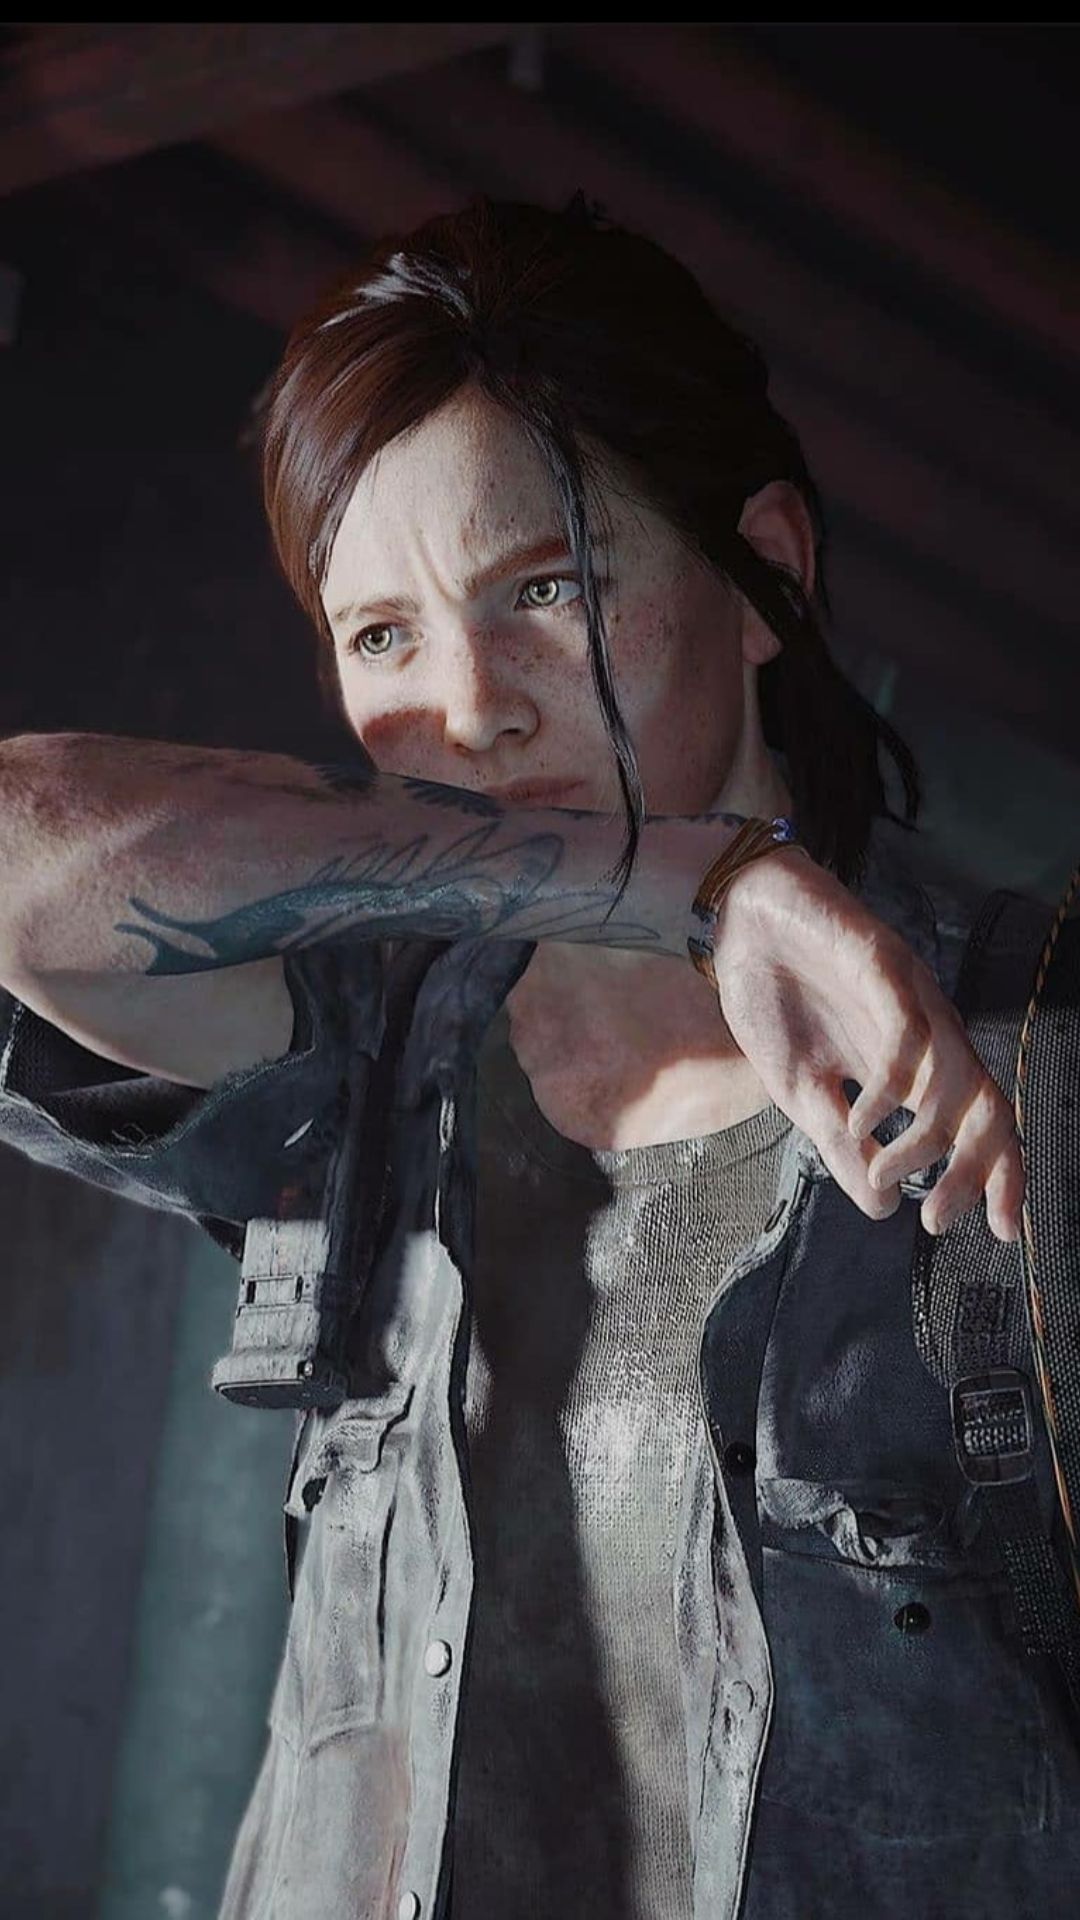 Some cool last of us iPhone wallpapers, I've been using : r